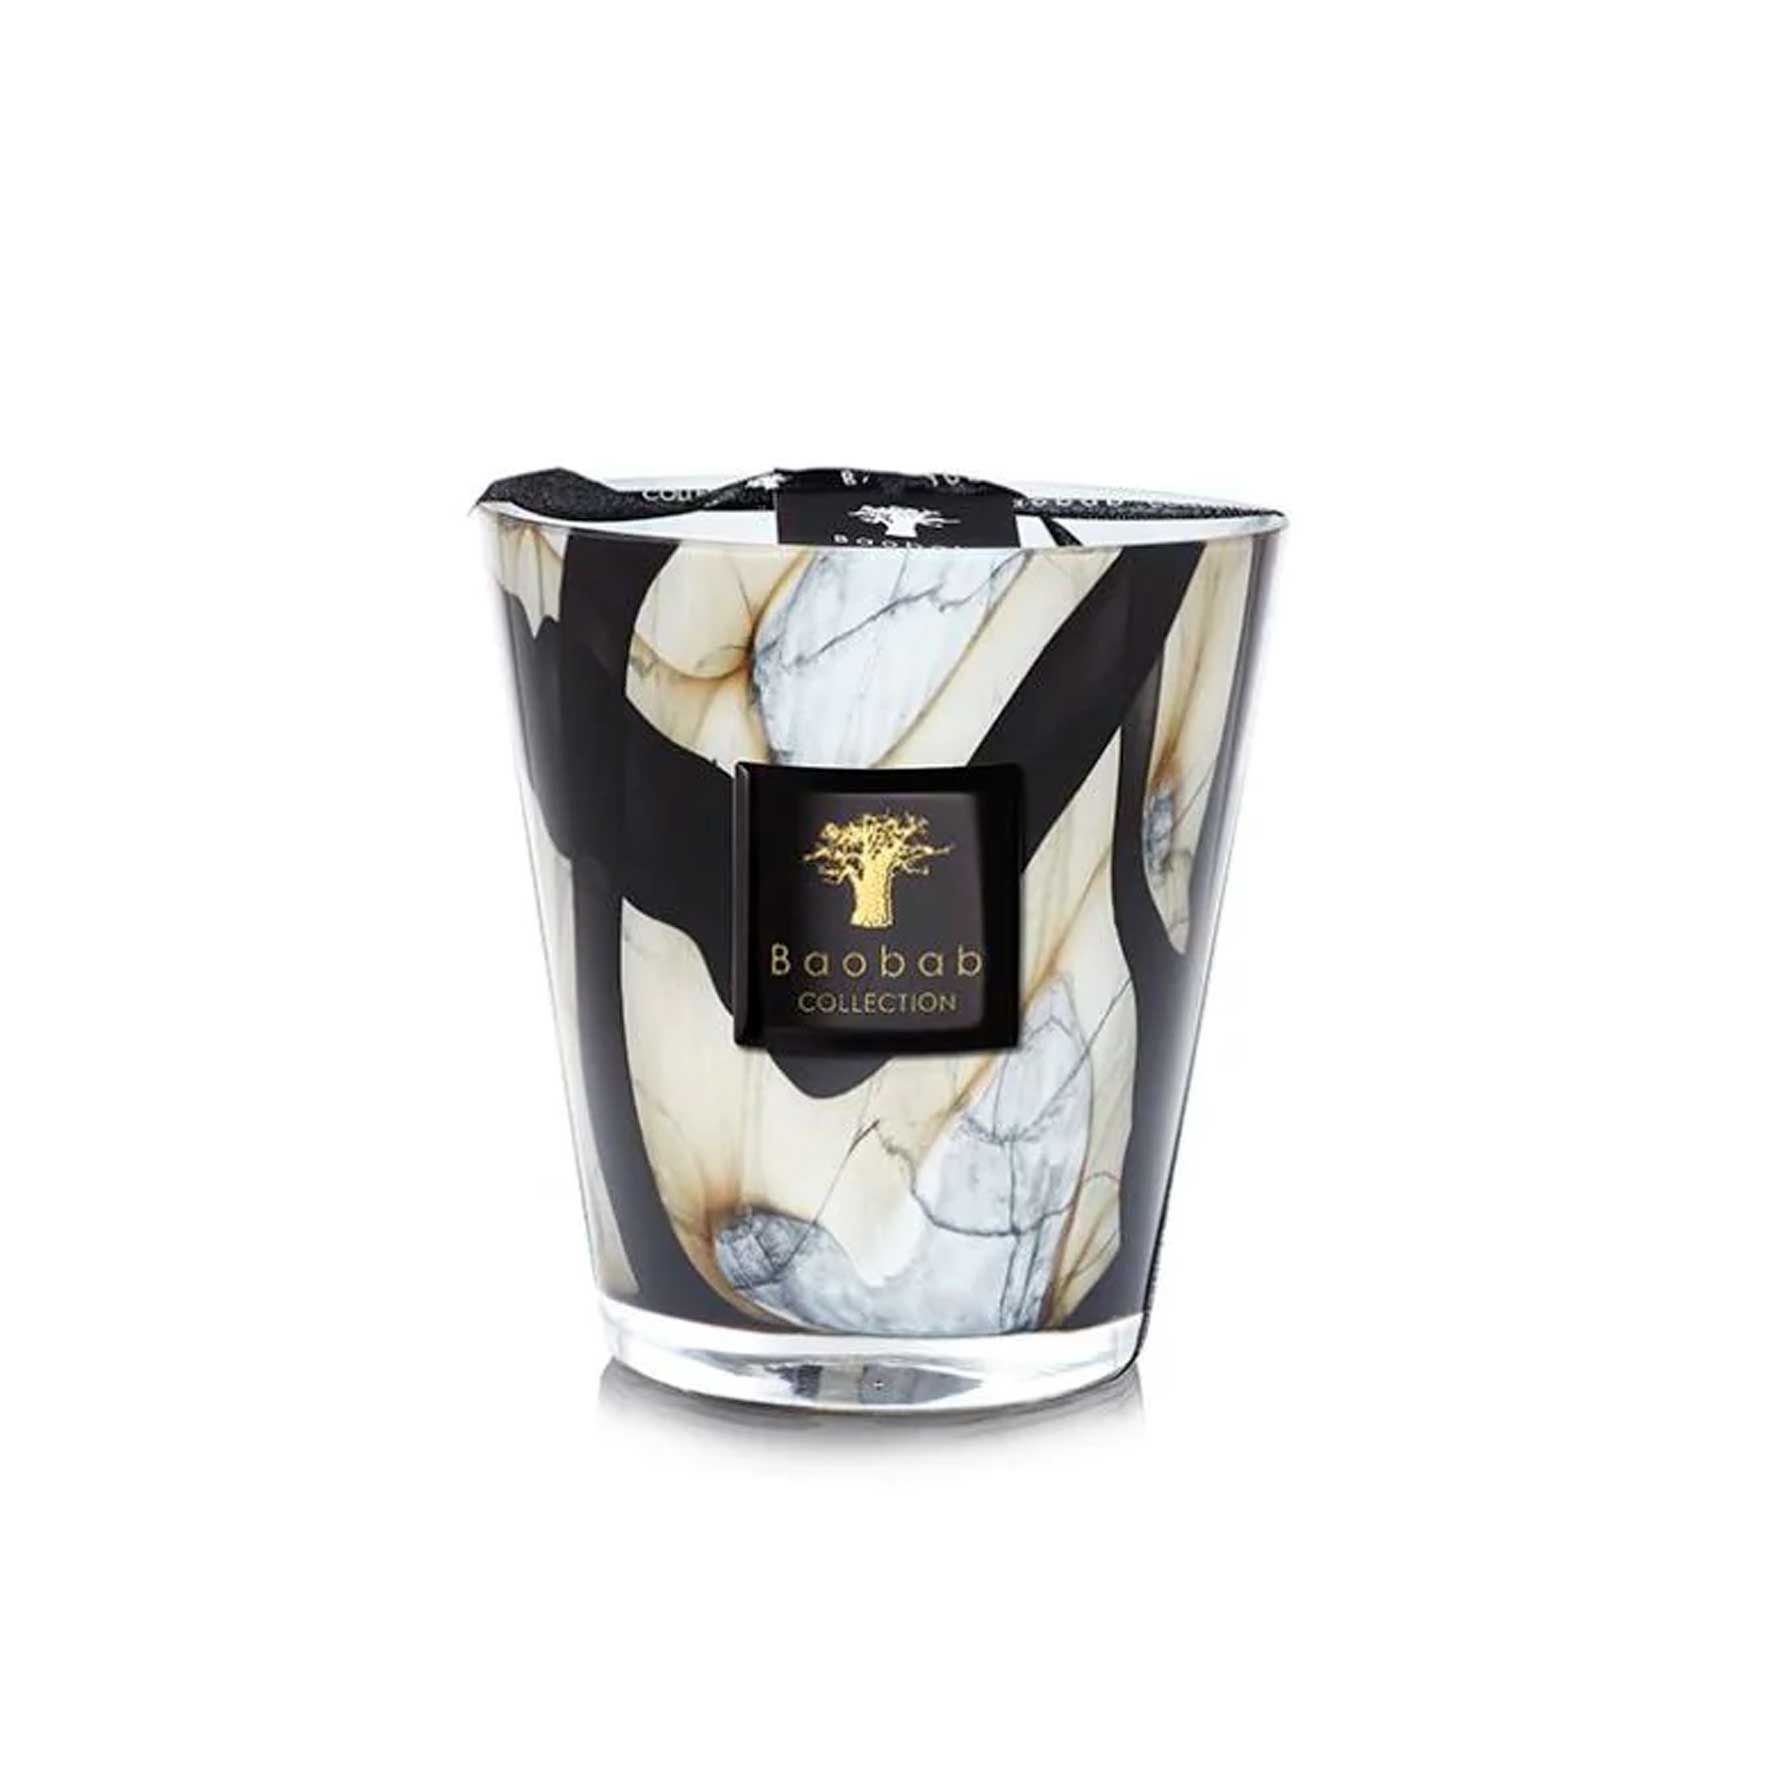 Baobab Collection Stones Marble Scented Candle, Black Glass | Barker & Stonehouse